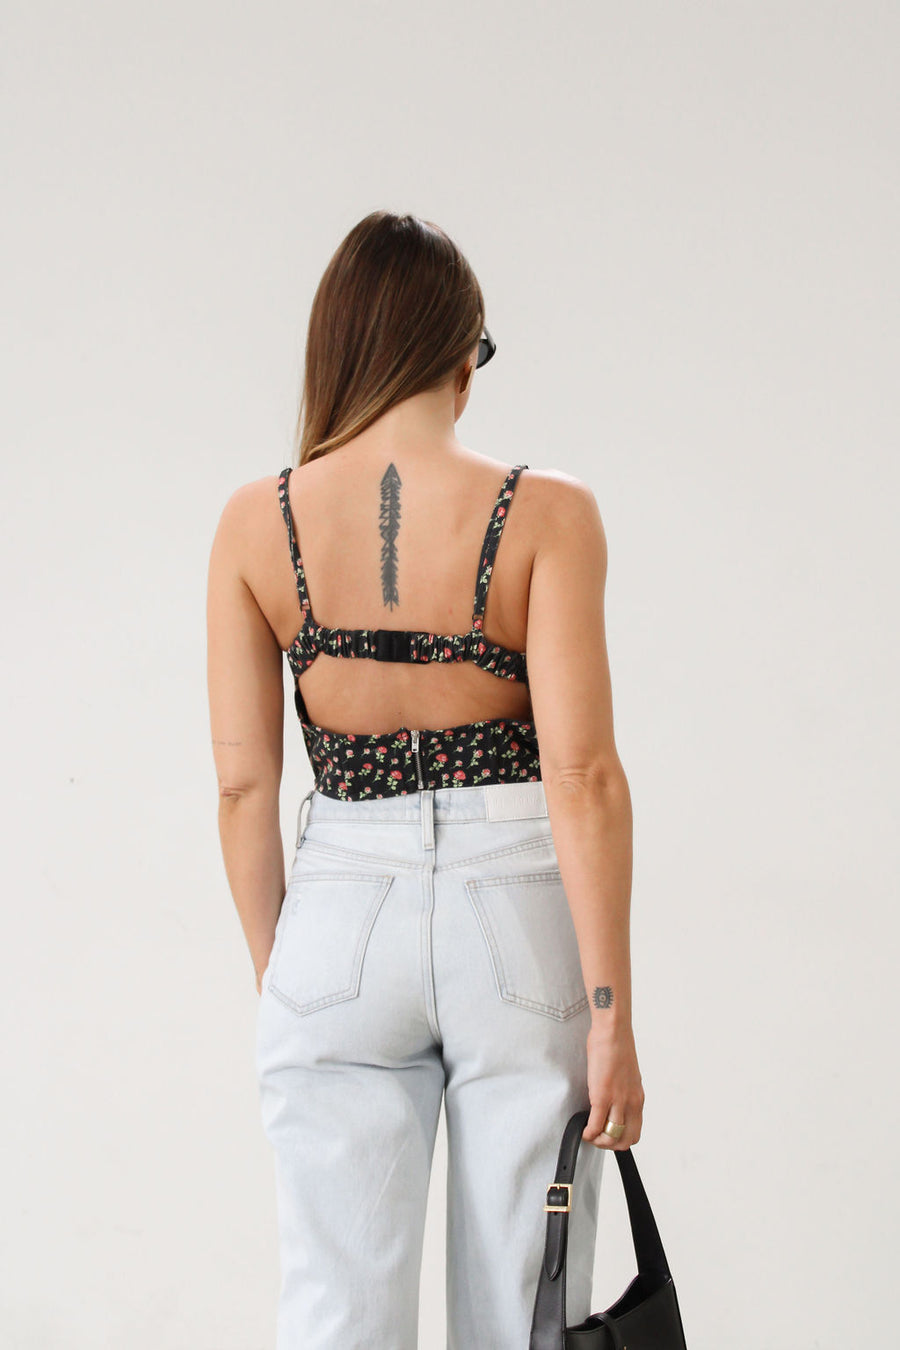 Floral printed woven cropped tank top. Adjustable straps. Boning in bodice. Elastic back strap with hook and eye closures. Back zipper closure. Fully lined.